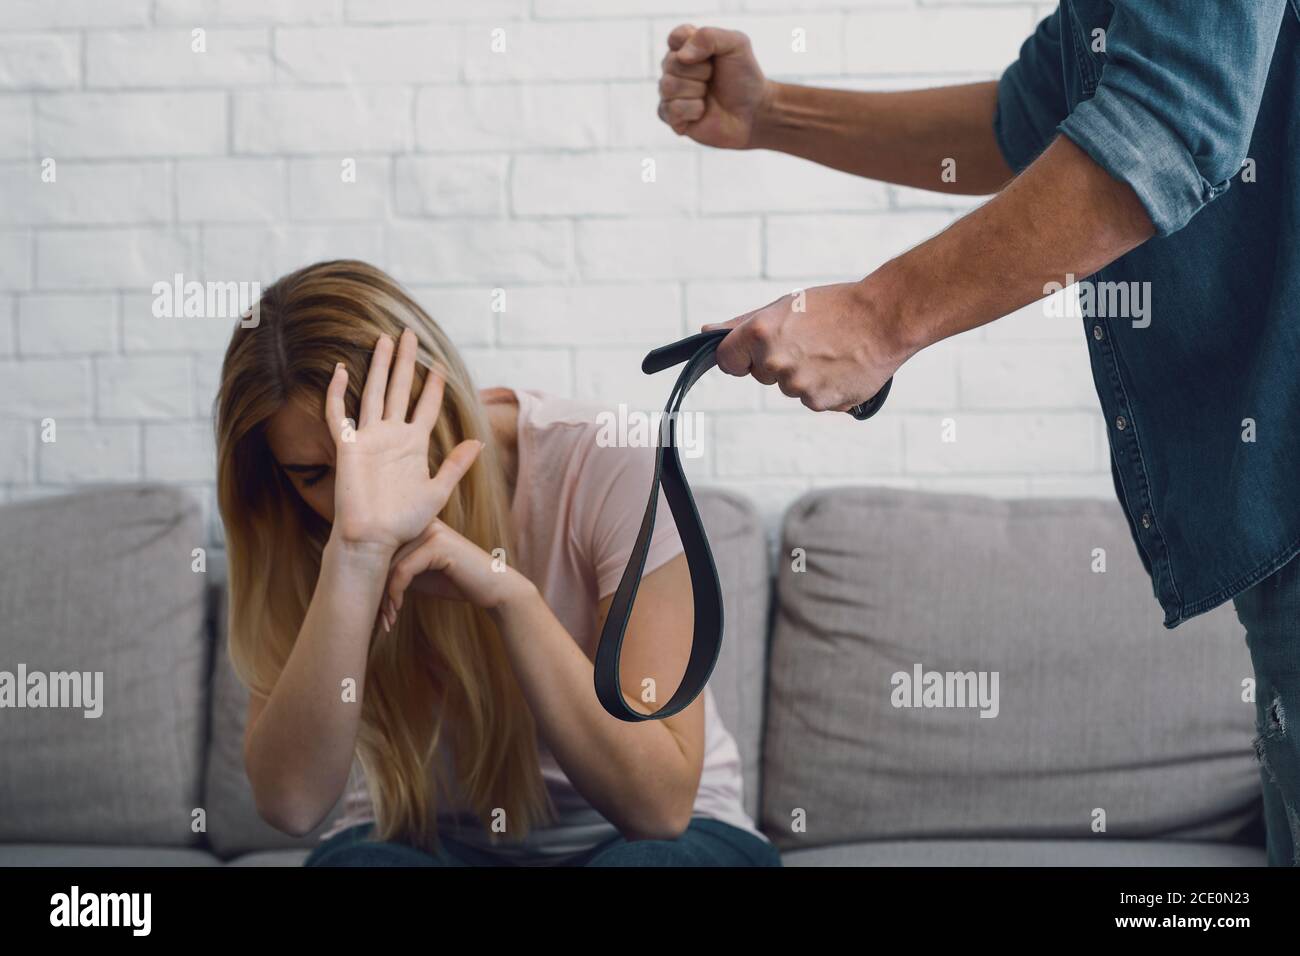 Threats and physical violence. Angry man threatens with fist and belt to  scared woman Stock Photo - Alamy